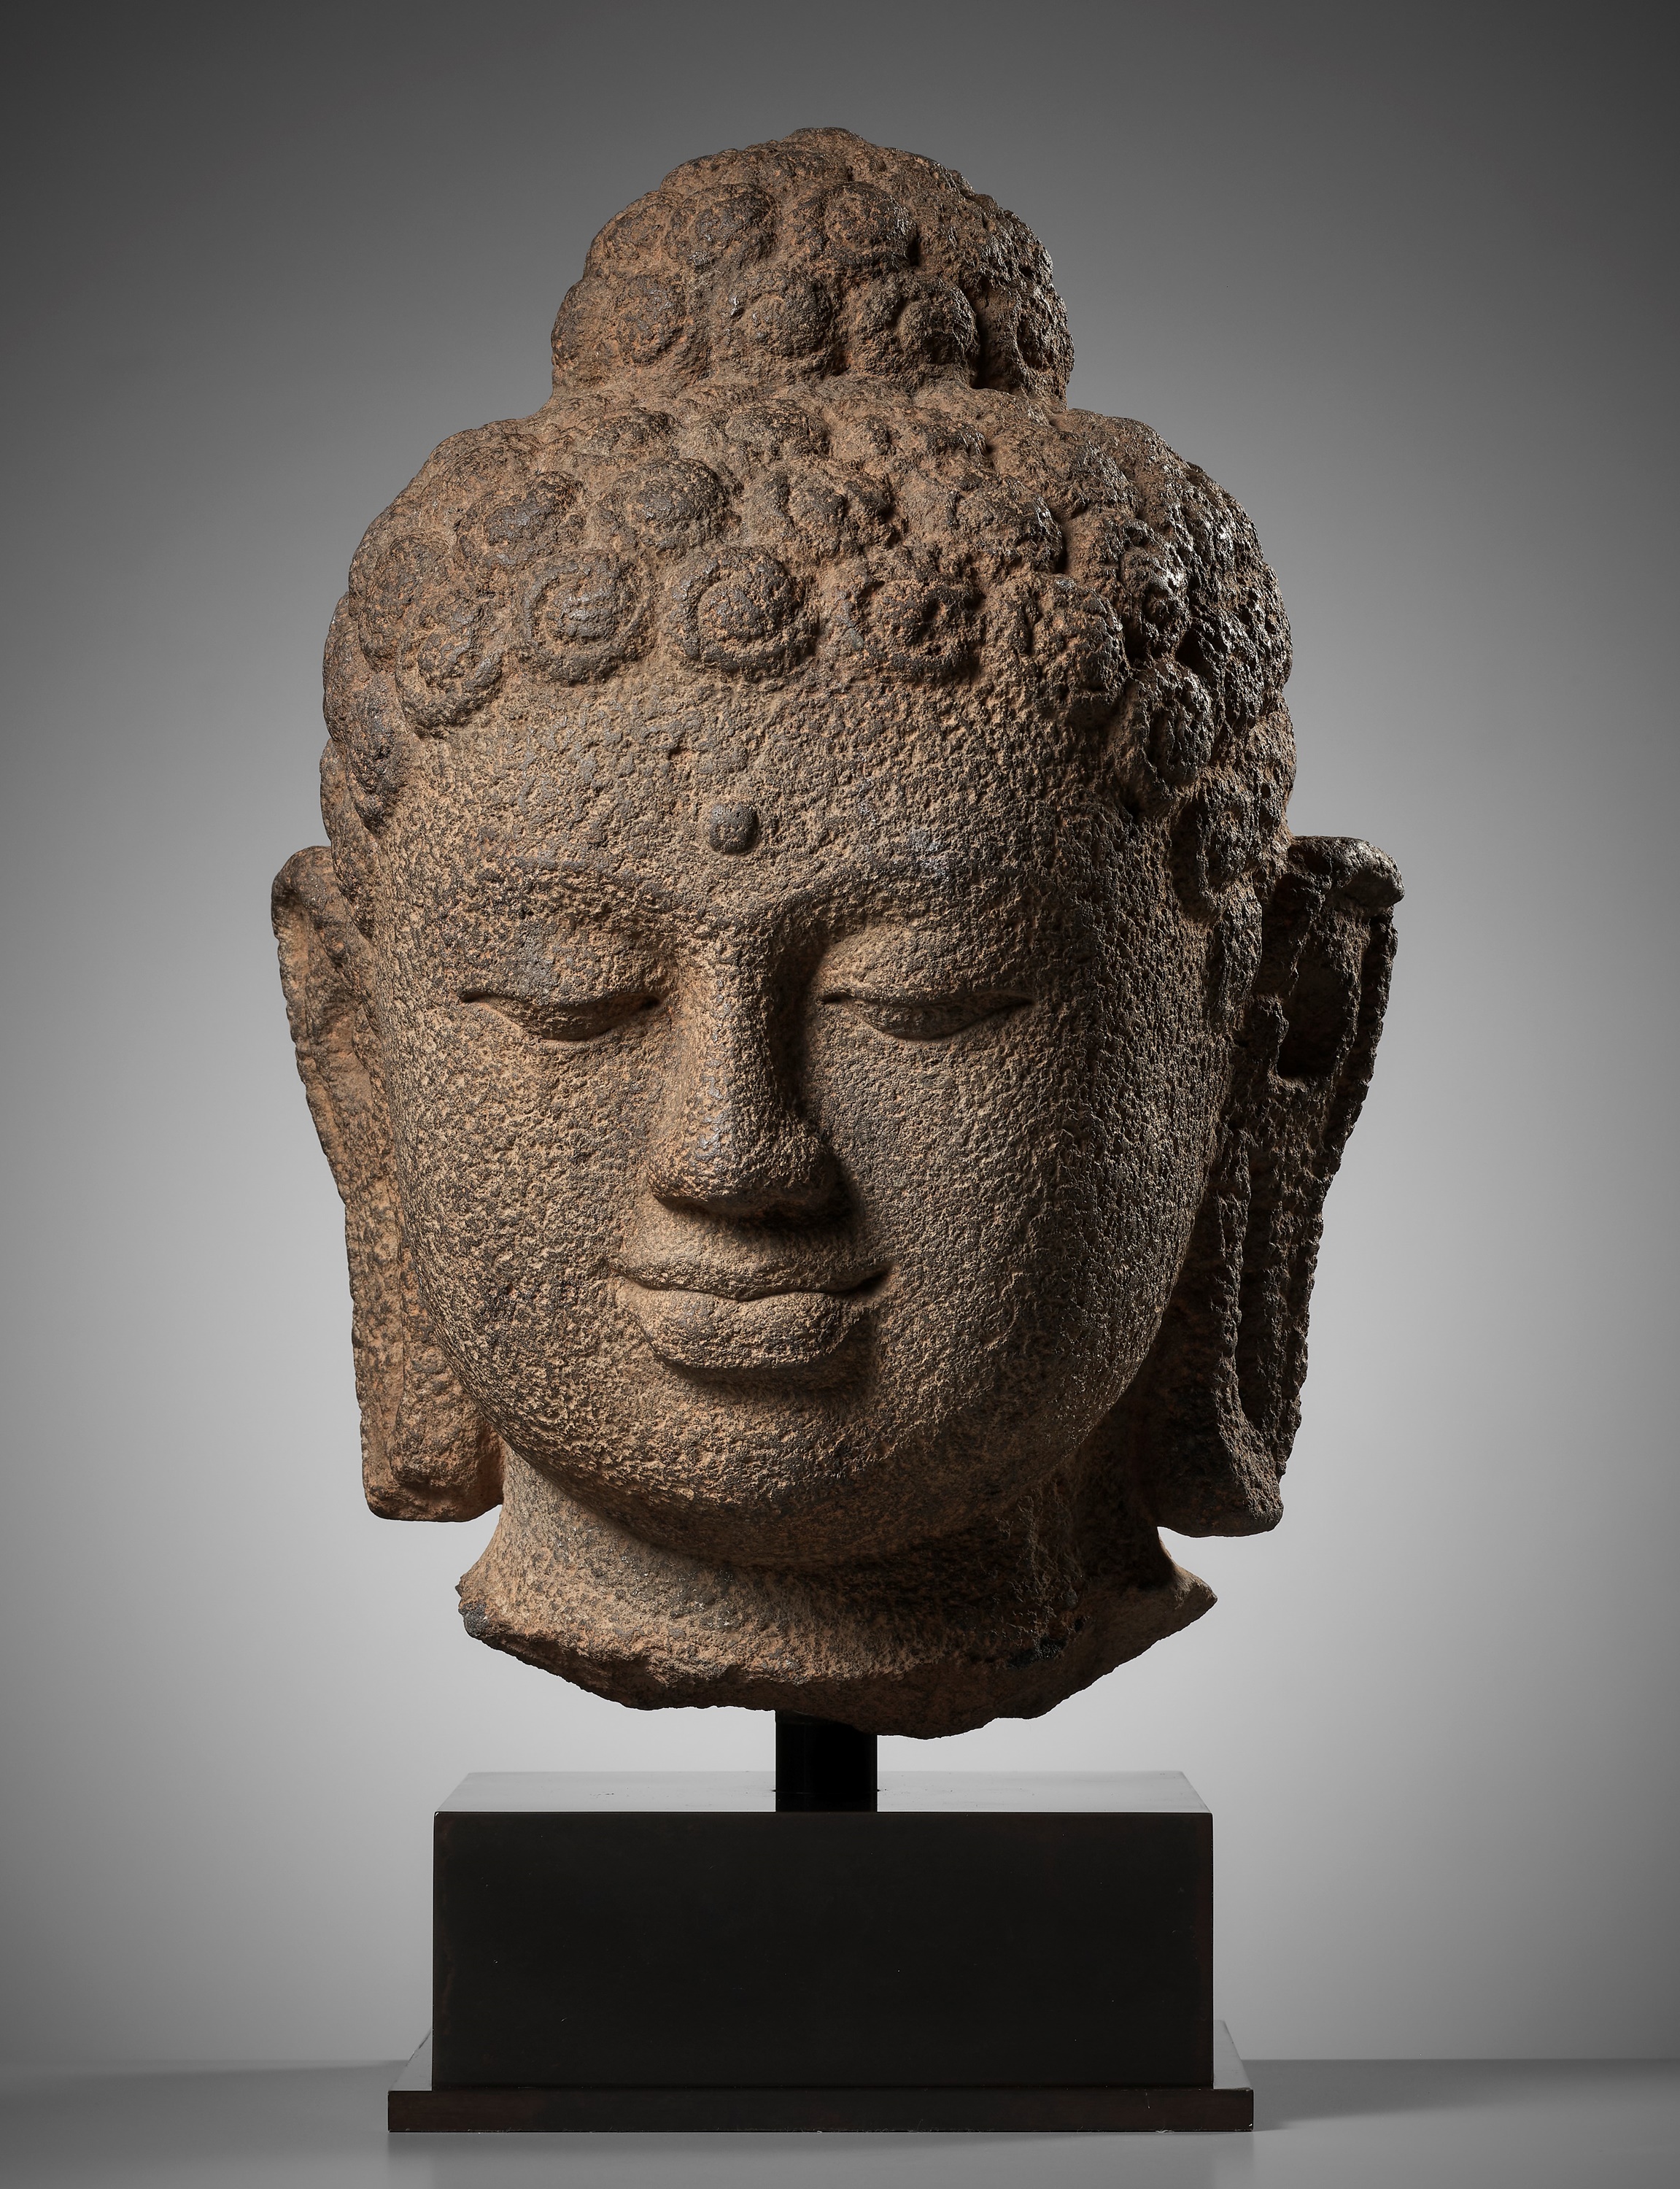 A LARGE ANDESITE HEAD OF BUDDHA, INDONESIA, CENTRAL JAVA, 9TH CENTURY